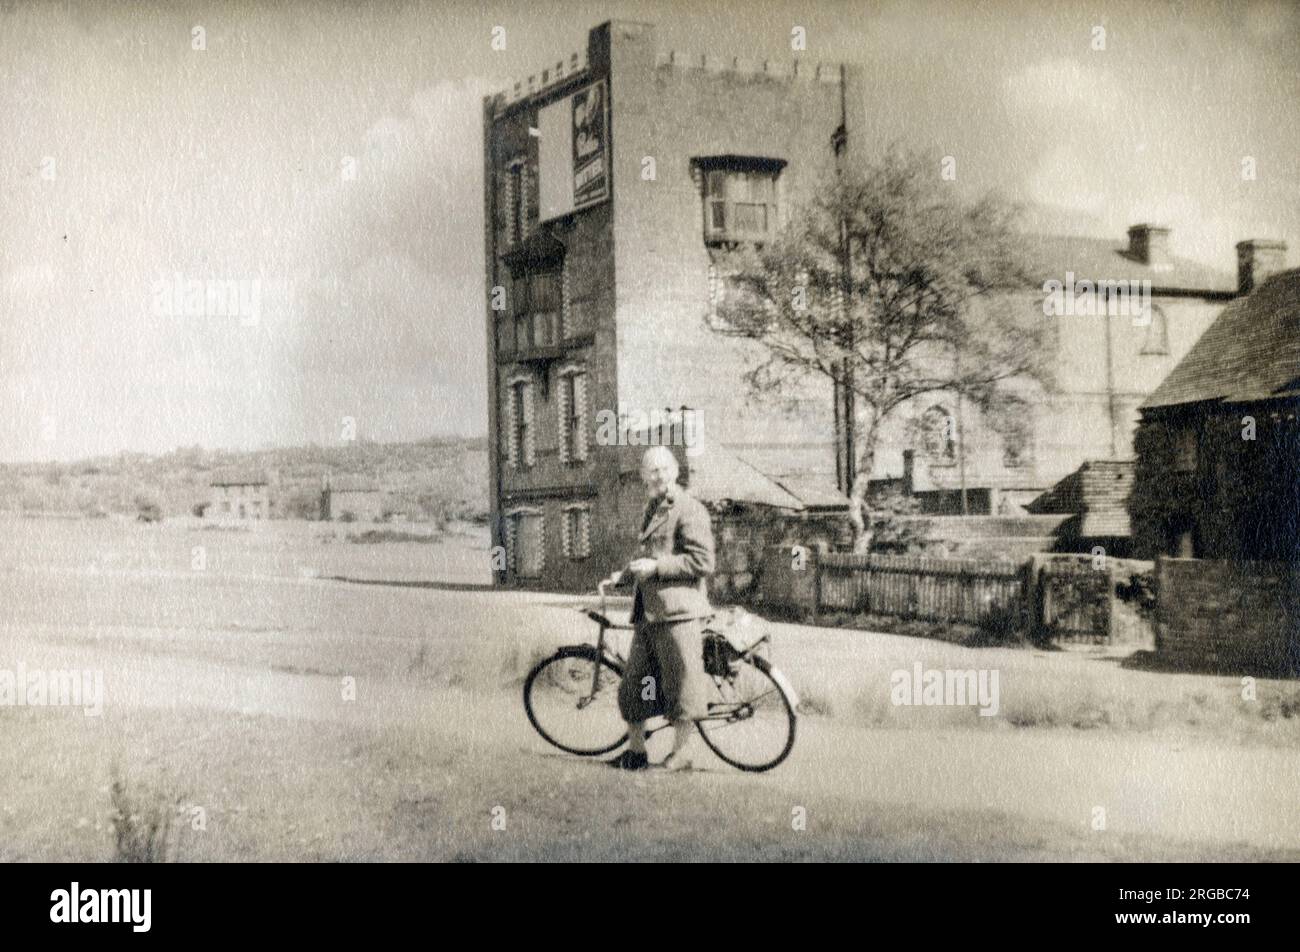 A smart gentleman out for a cycle (in his plus-fours) pauses in front of an unusual building, which appears to be part-castle, part-church and part-townhouse - location sadly unidentified... Stock Photo